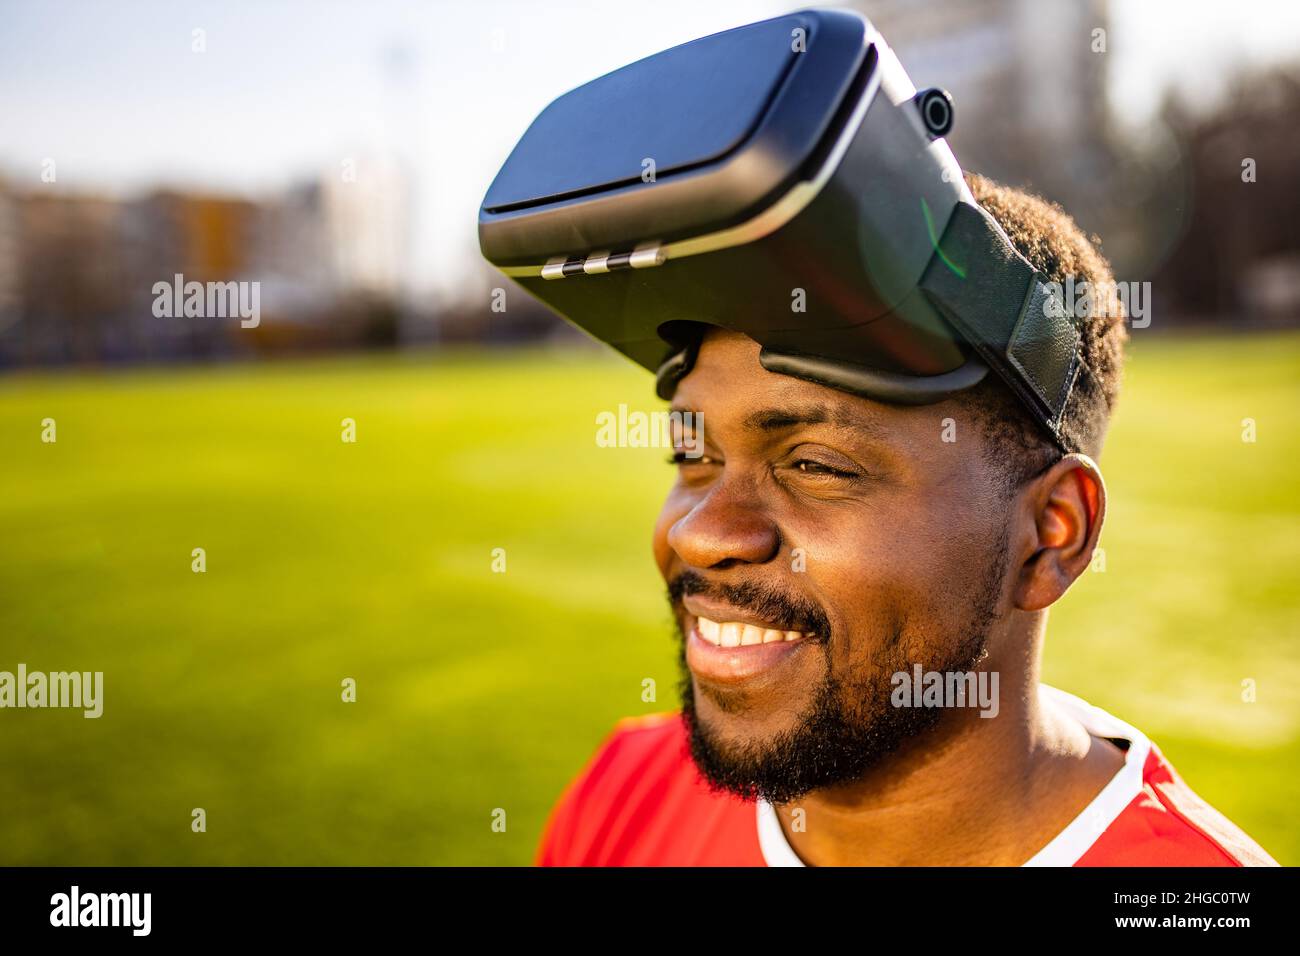 happy man in virtual reality glasses in football field background is blurred concept of virtual reality outdoors summer sunny day Stock Photo